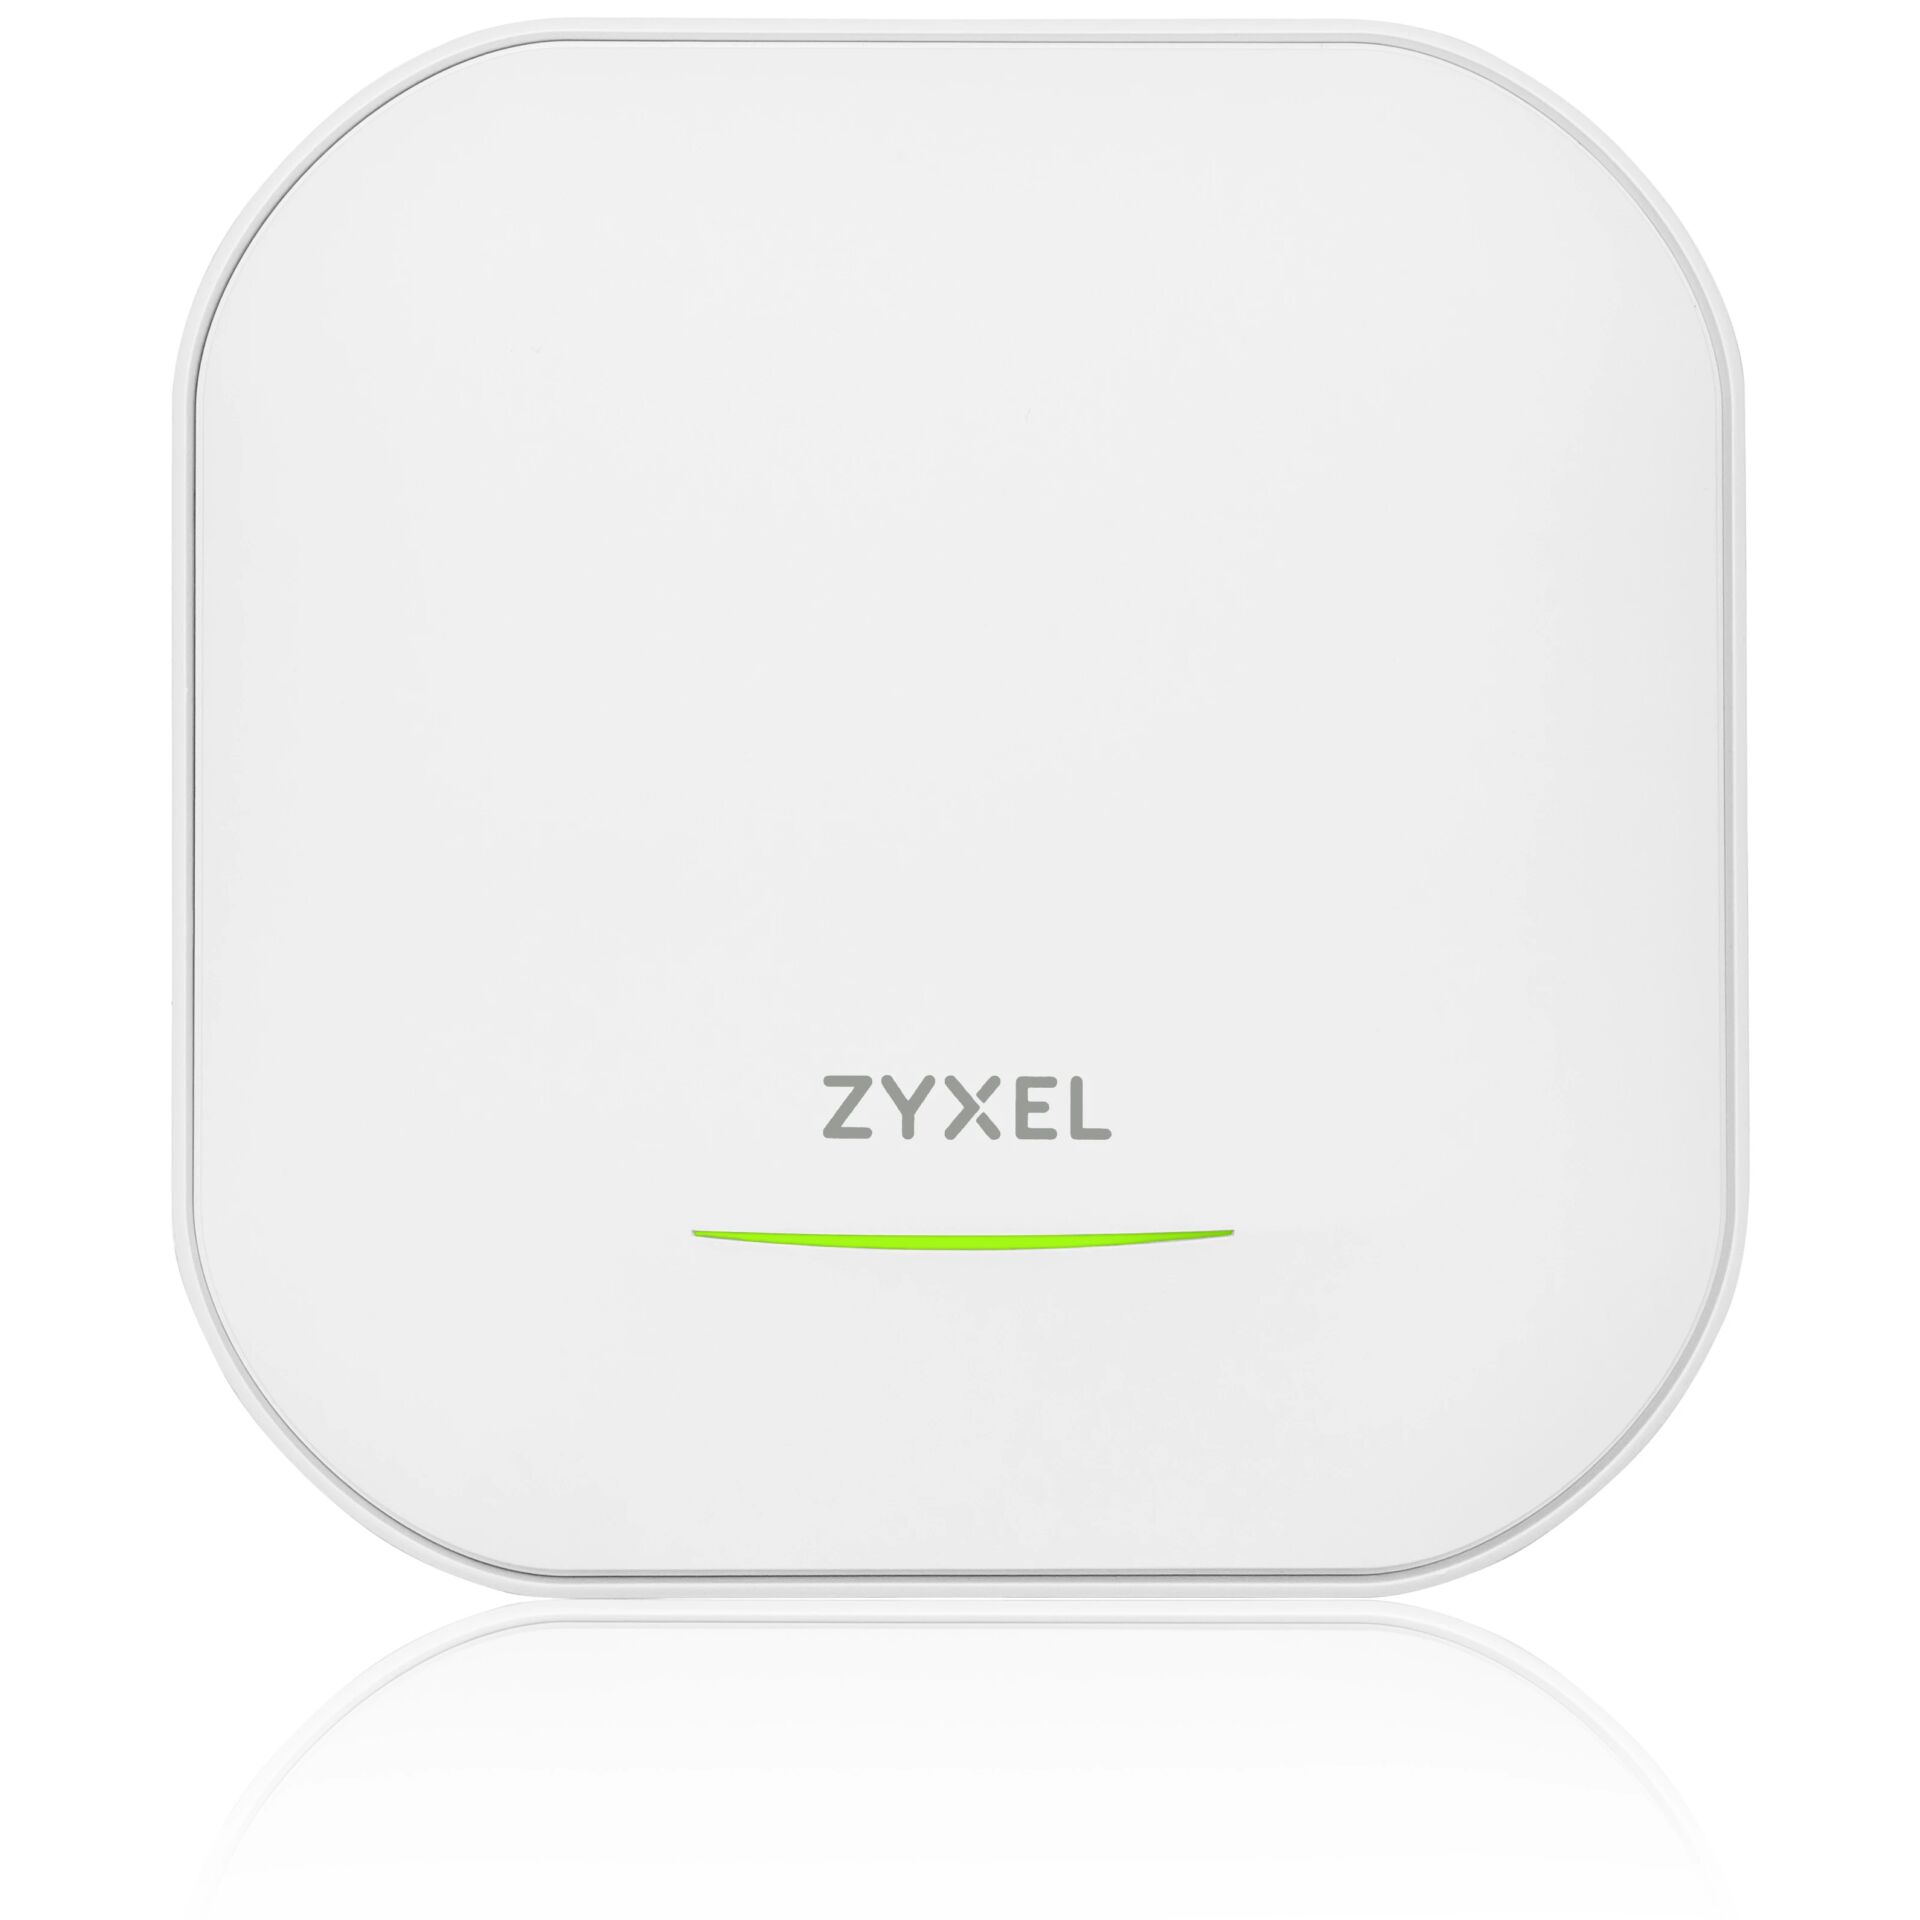 Zyxel WX3100-T0 - Wi-Fi system (access point/extender) - Buy